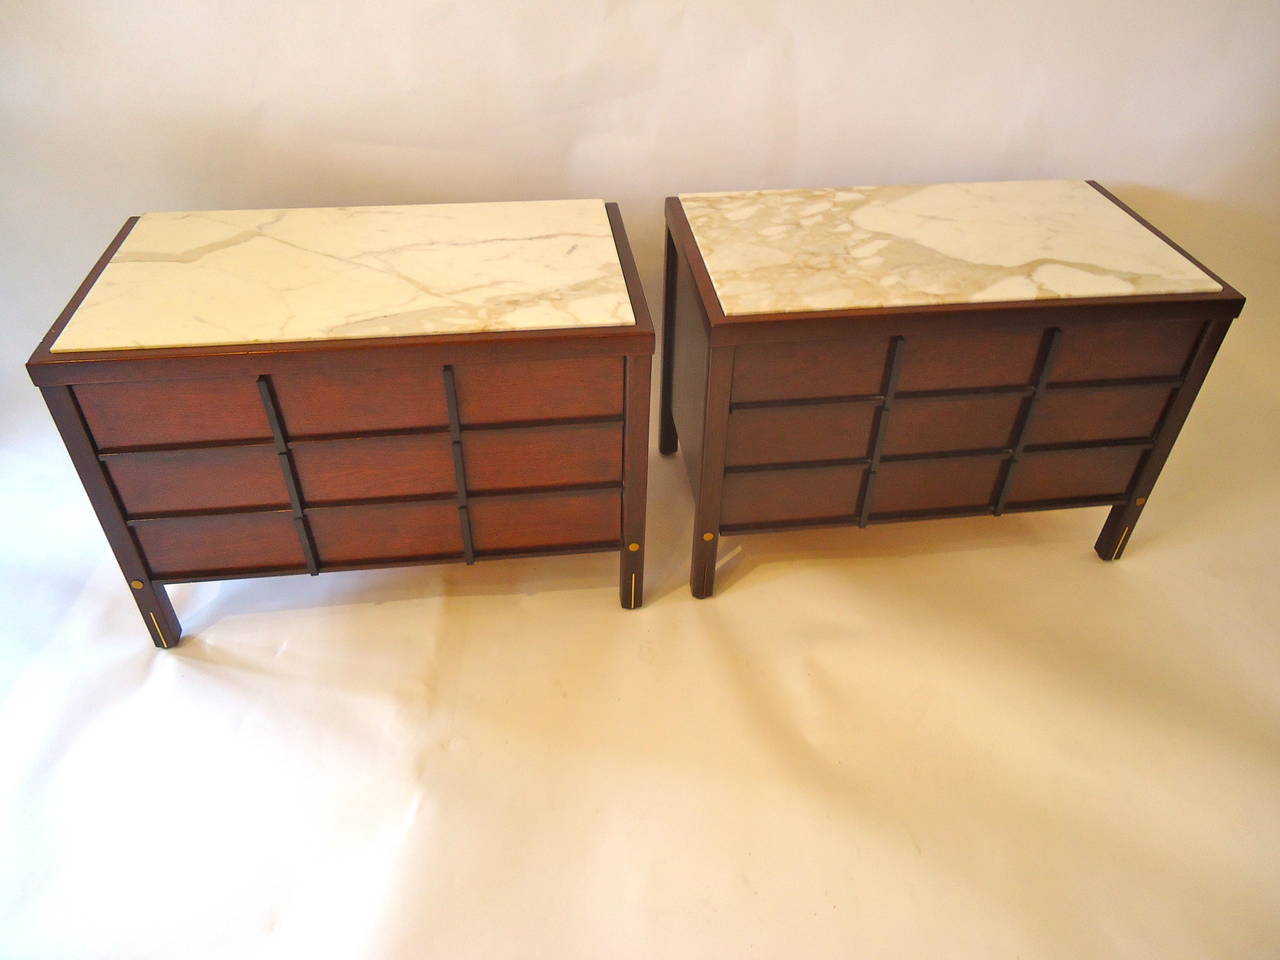 Beautiful midcentury modern endtables or nightstands in dark mahogany with creamy marble tops.  3 Drawers in each and cool brass detailing on the front of legs.